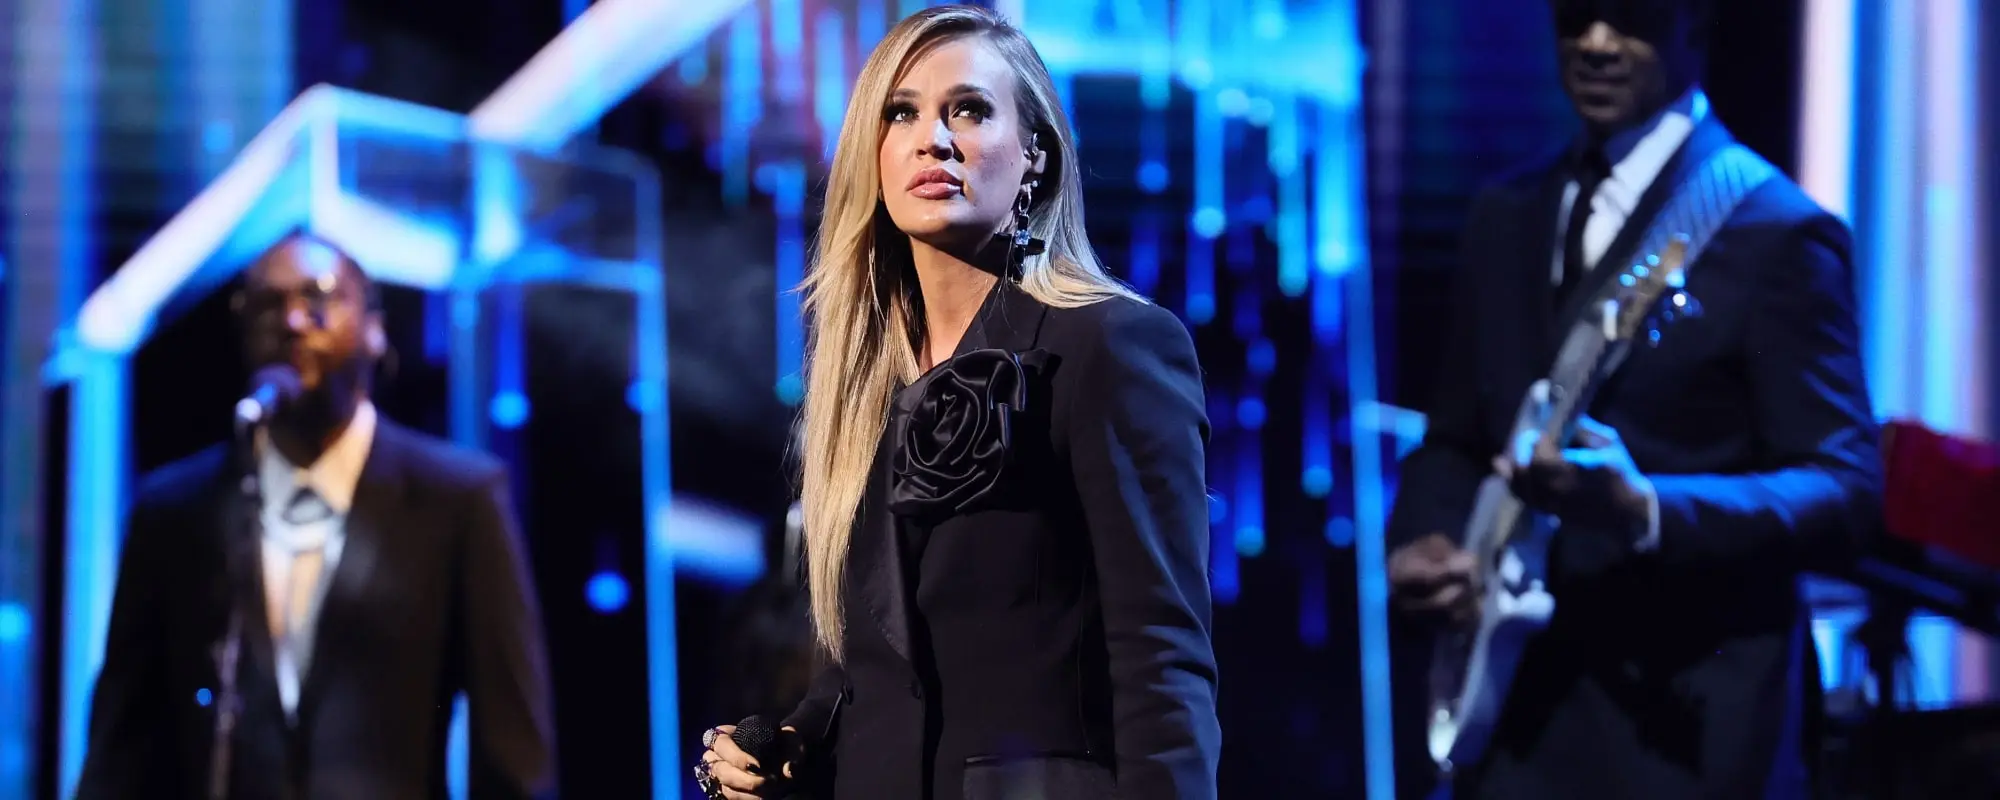 Carrie Underwood Reveals if She’d Ever Headline the Super Bowl Halftime Show